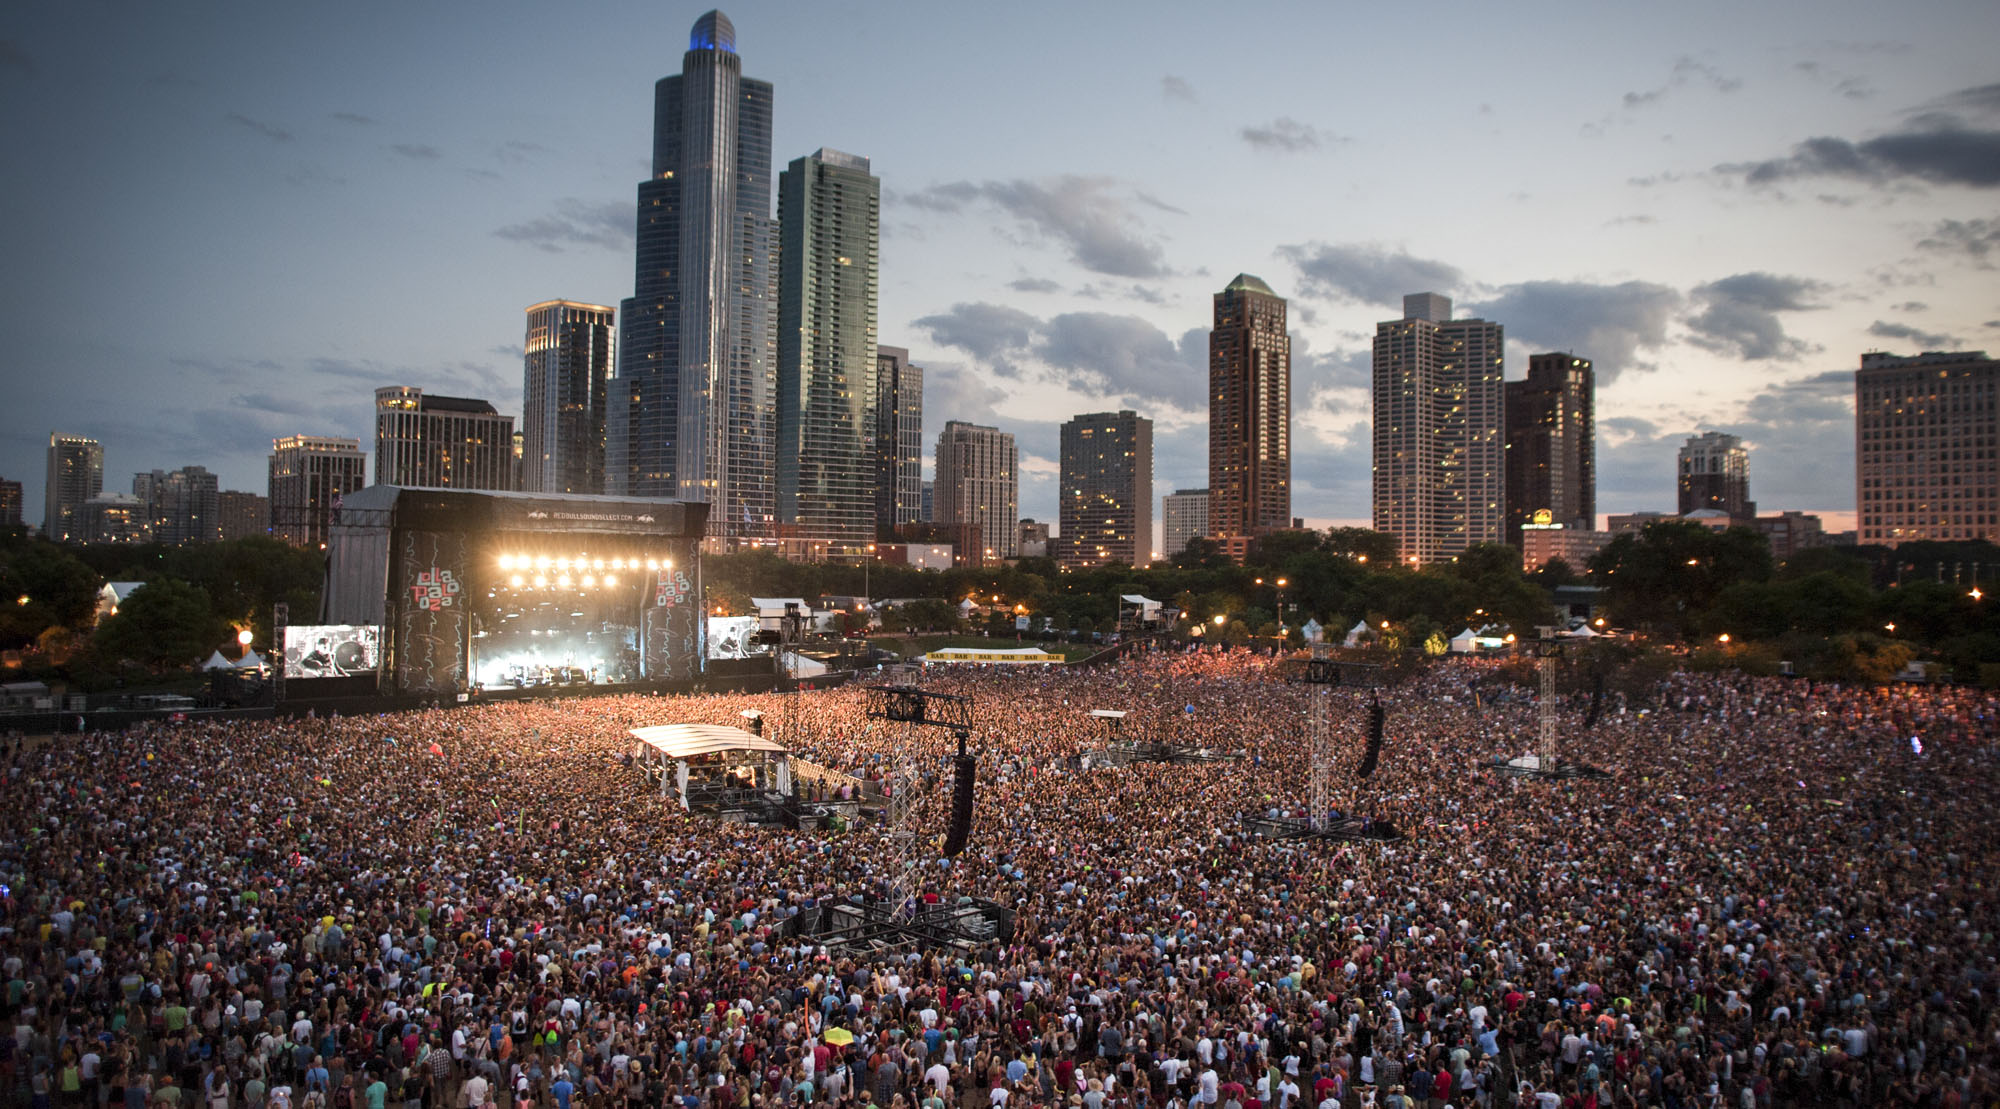 Lollapalooza 2018 Seeks Redemption With Stellar Lineup + 7 Acts Not To Miss